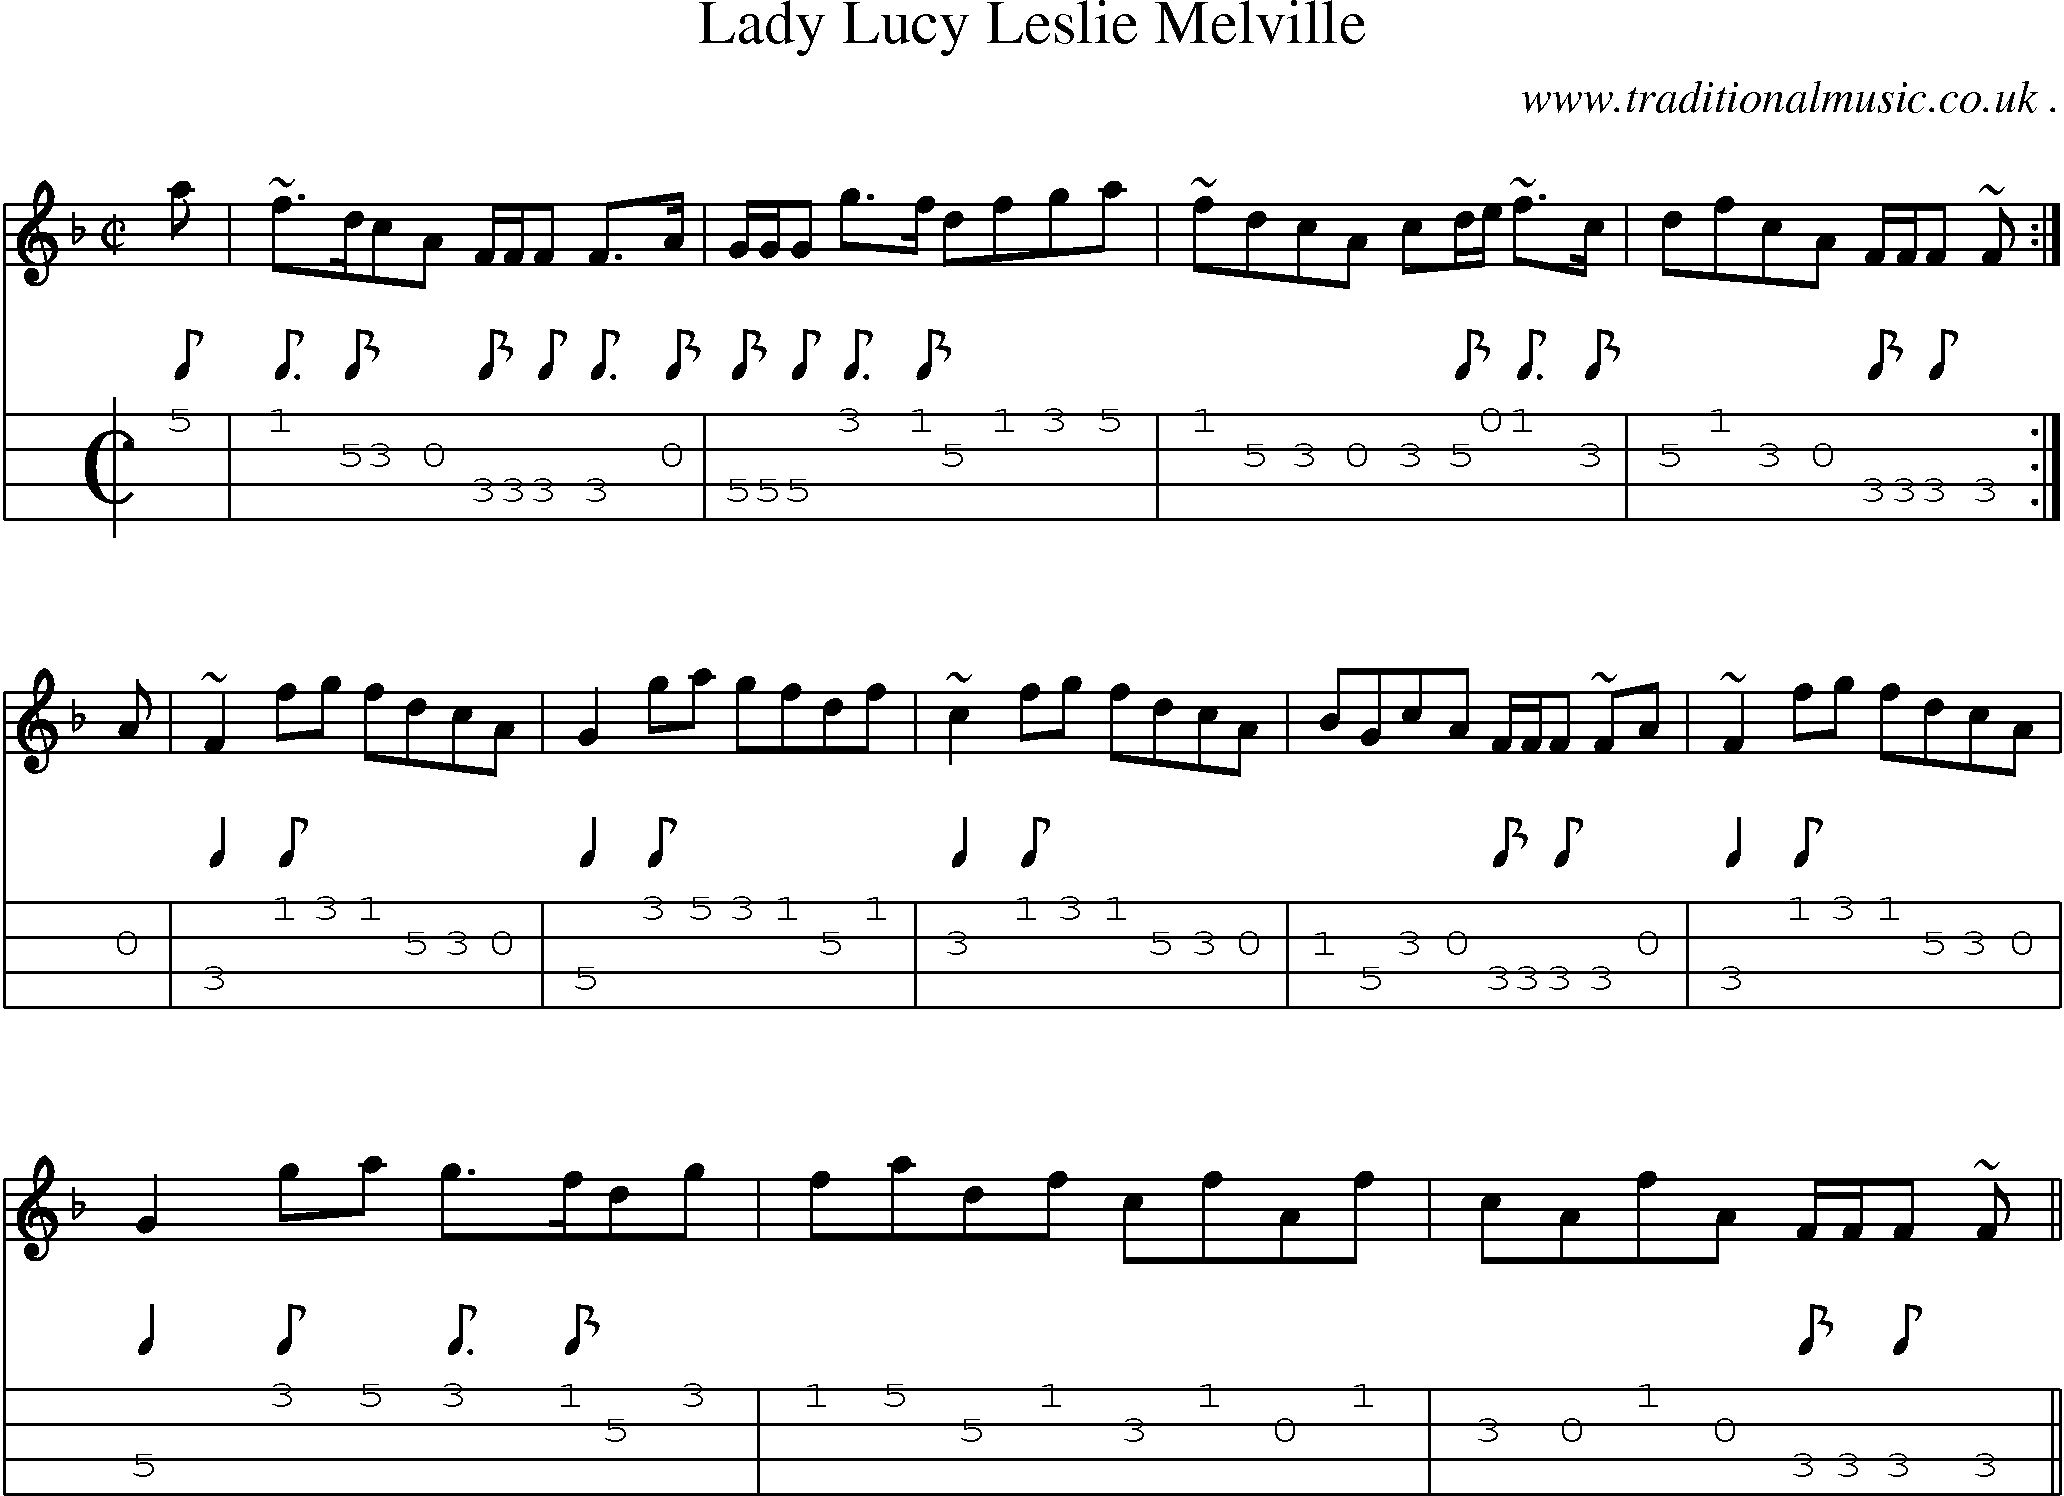 Sheet-music  score, Chords and Mandolin Tabs for Lady Lucy Leslie Melville